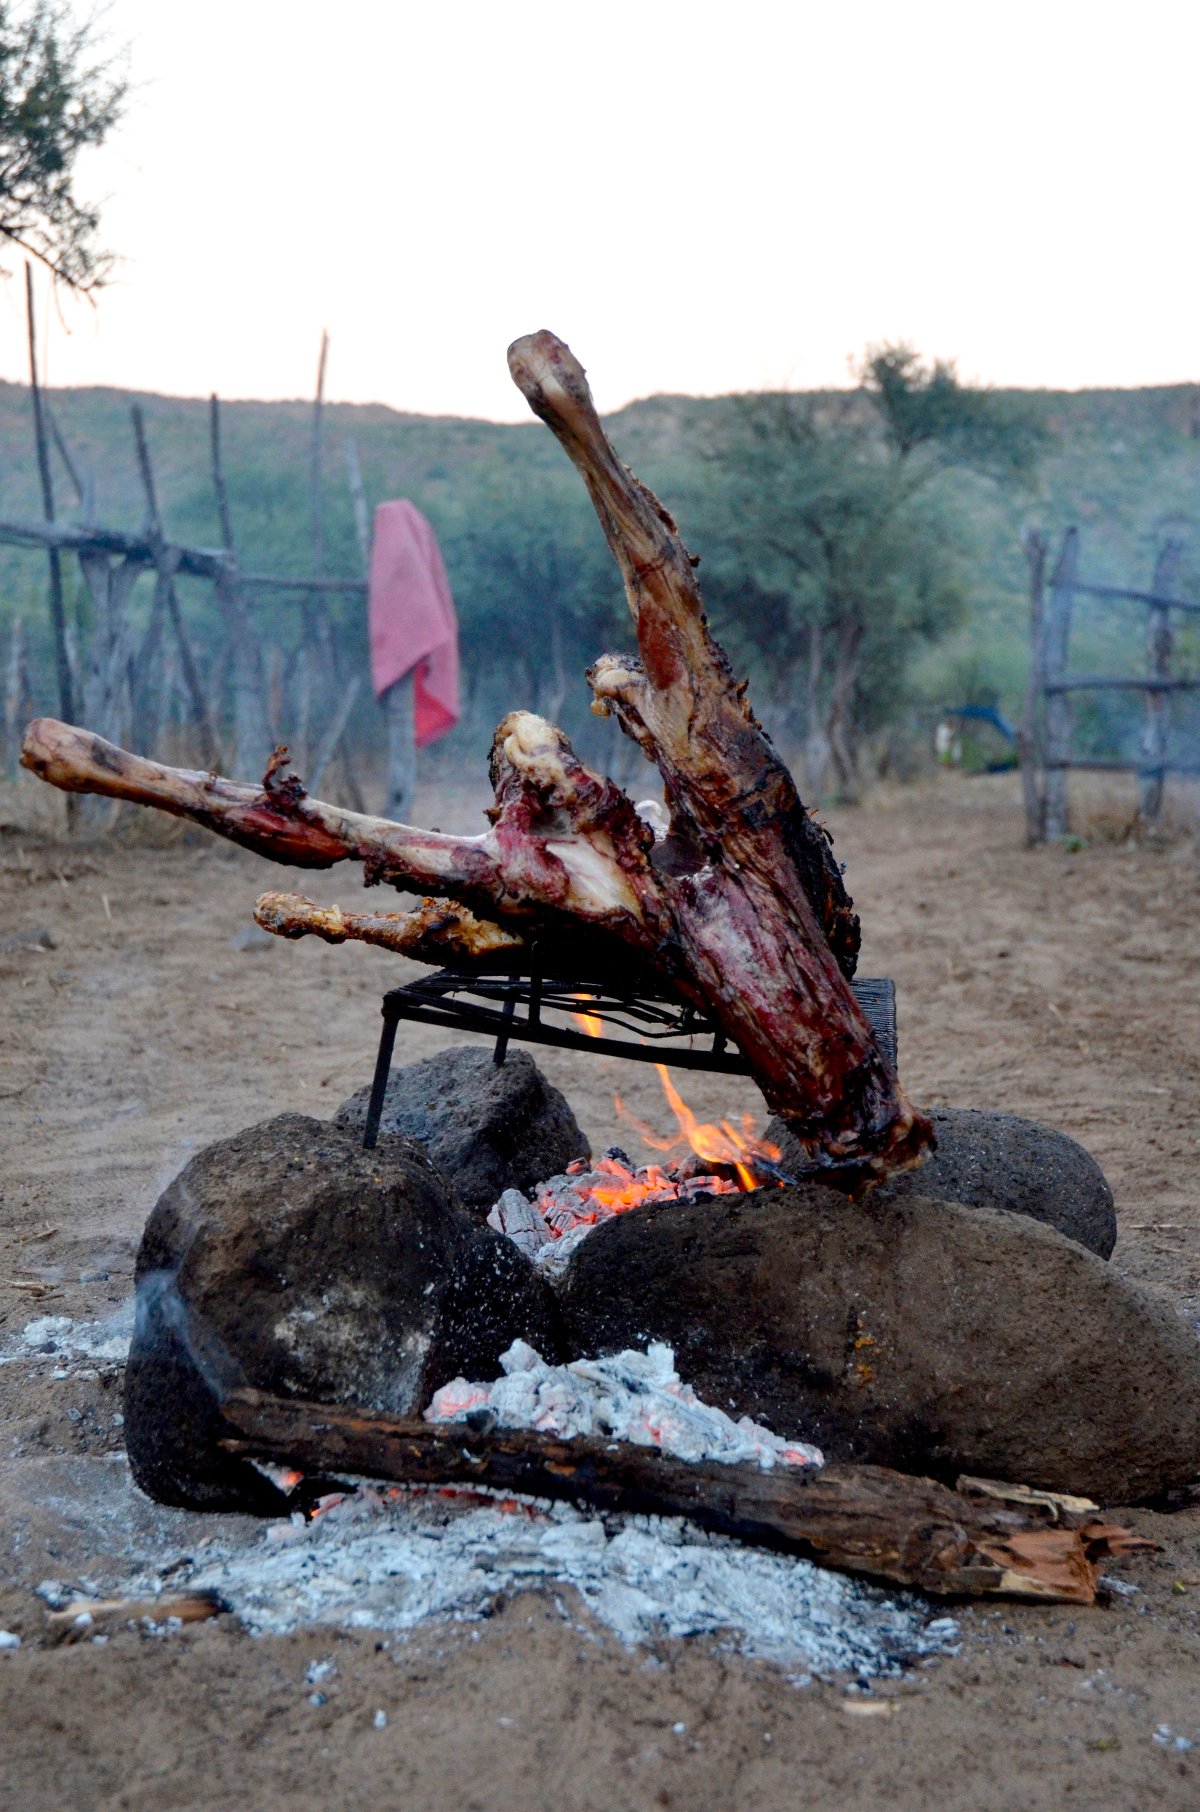 Roasting a goat on fire